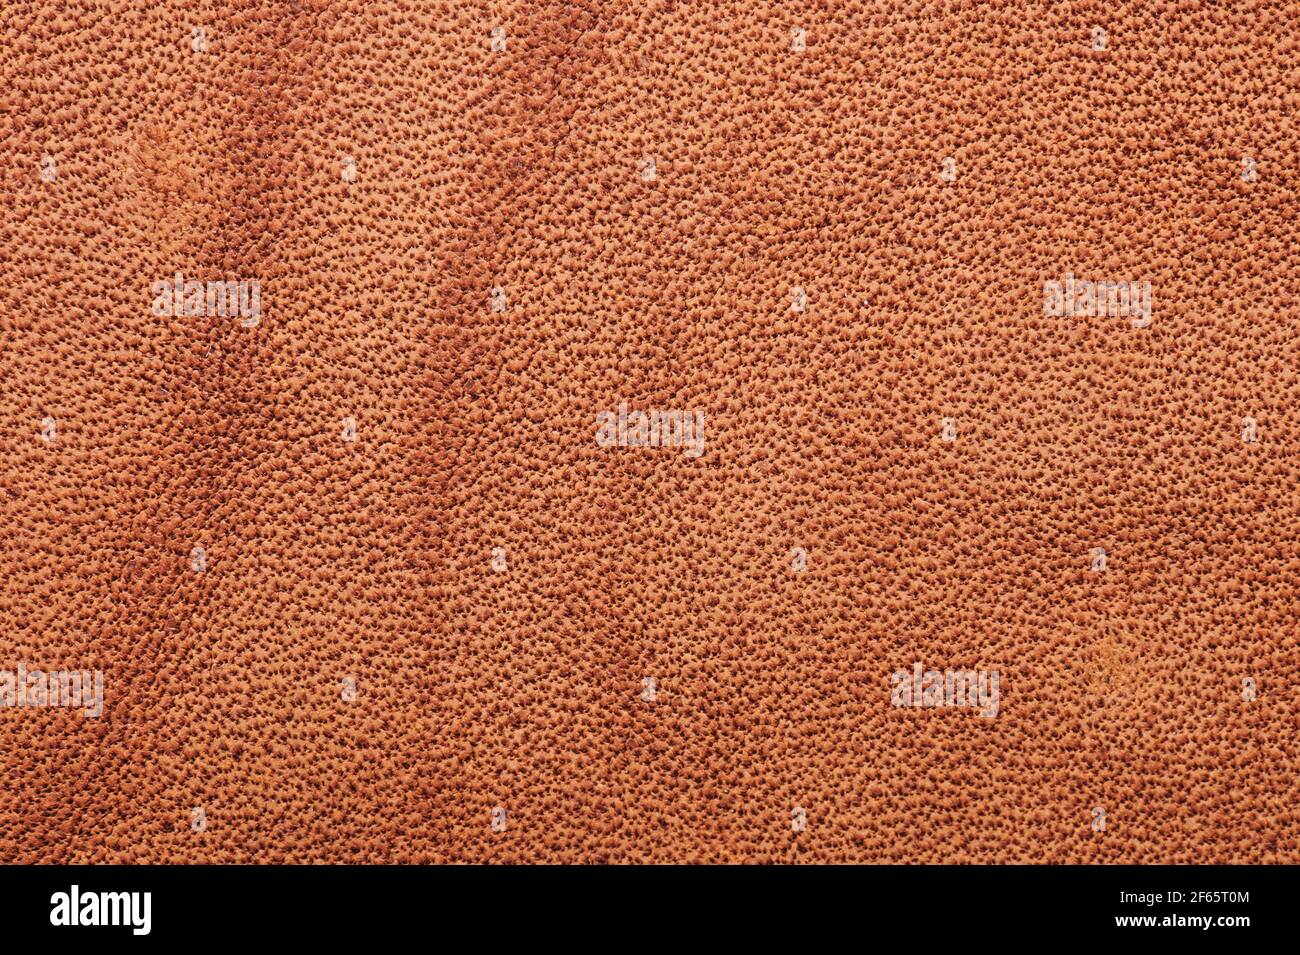 Brown natural grained skin background macro close up view Stock Photo